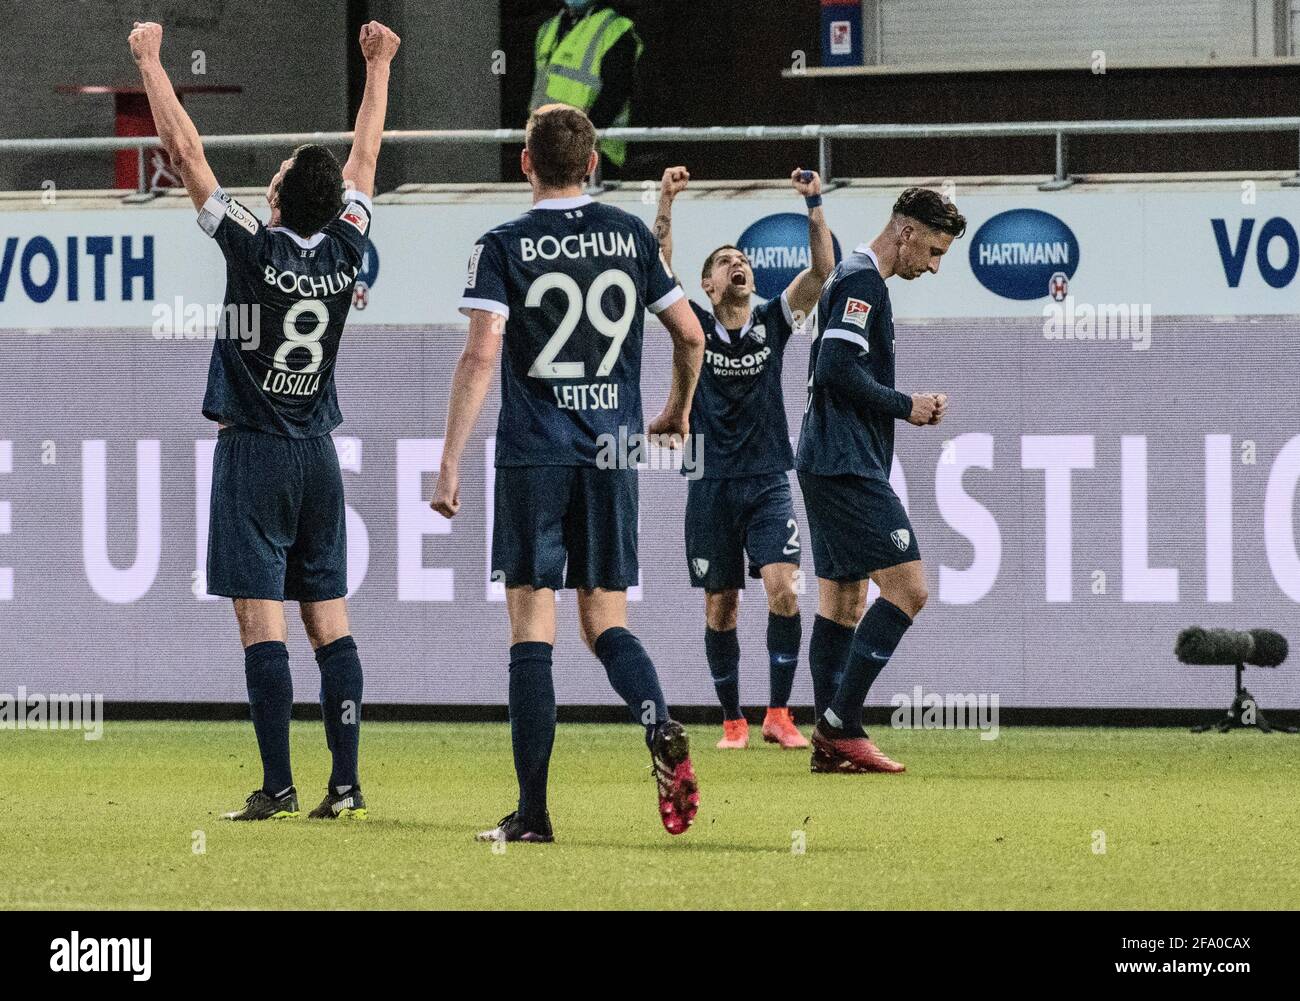 Heidenheim, Germany. 21st Apr, 2021. Football: 2. Bundesliga, 1. FC Heidenheim - VfL Bochum, Matchday 30 at Voith Arena. Bochum's (l-r) Anthony Losilla, Maxim Leitsch, Christian Gamboa and Robert Zulj cheer. Credit: Stefan Puchner/dpa - IMPORTANT NOTE: In accordance with the regulations of the DFL Deutsche Fußball Liga and/or the DFB Deutscher Fußball-Bund, it is prohibited to use or have used photographs taken in the stadium and/or of the match in the form of sequence pictures and/or video-like photo series./dpa/Alamy Live News Stock Photo